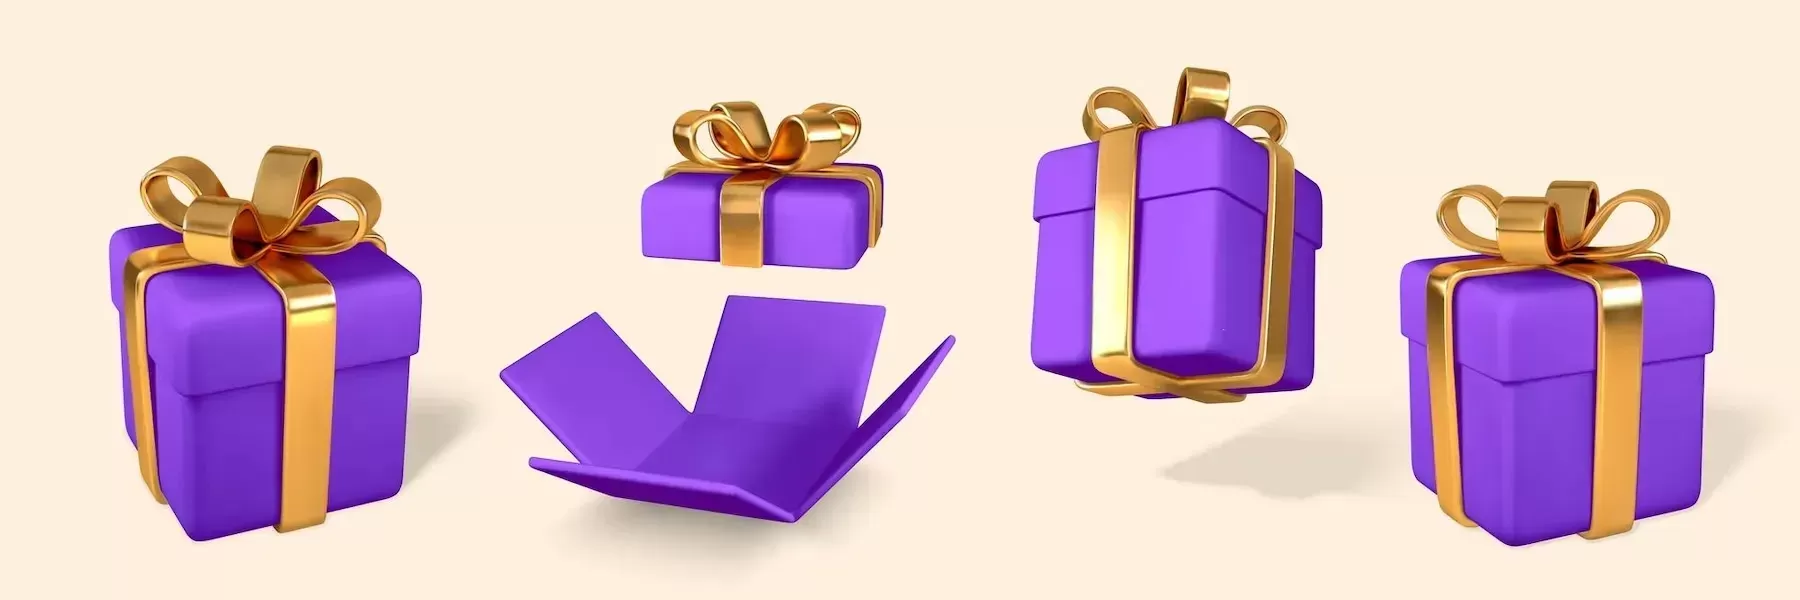 3d realistic purple gift boxes with golden